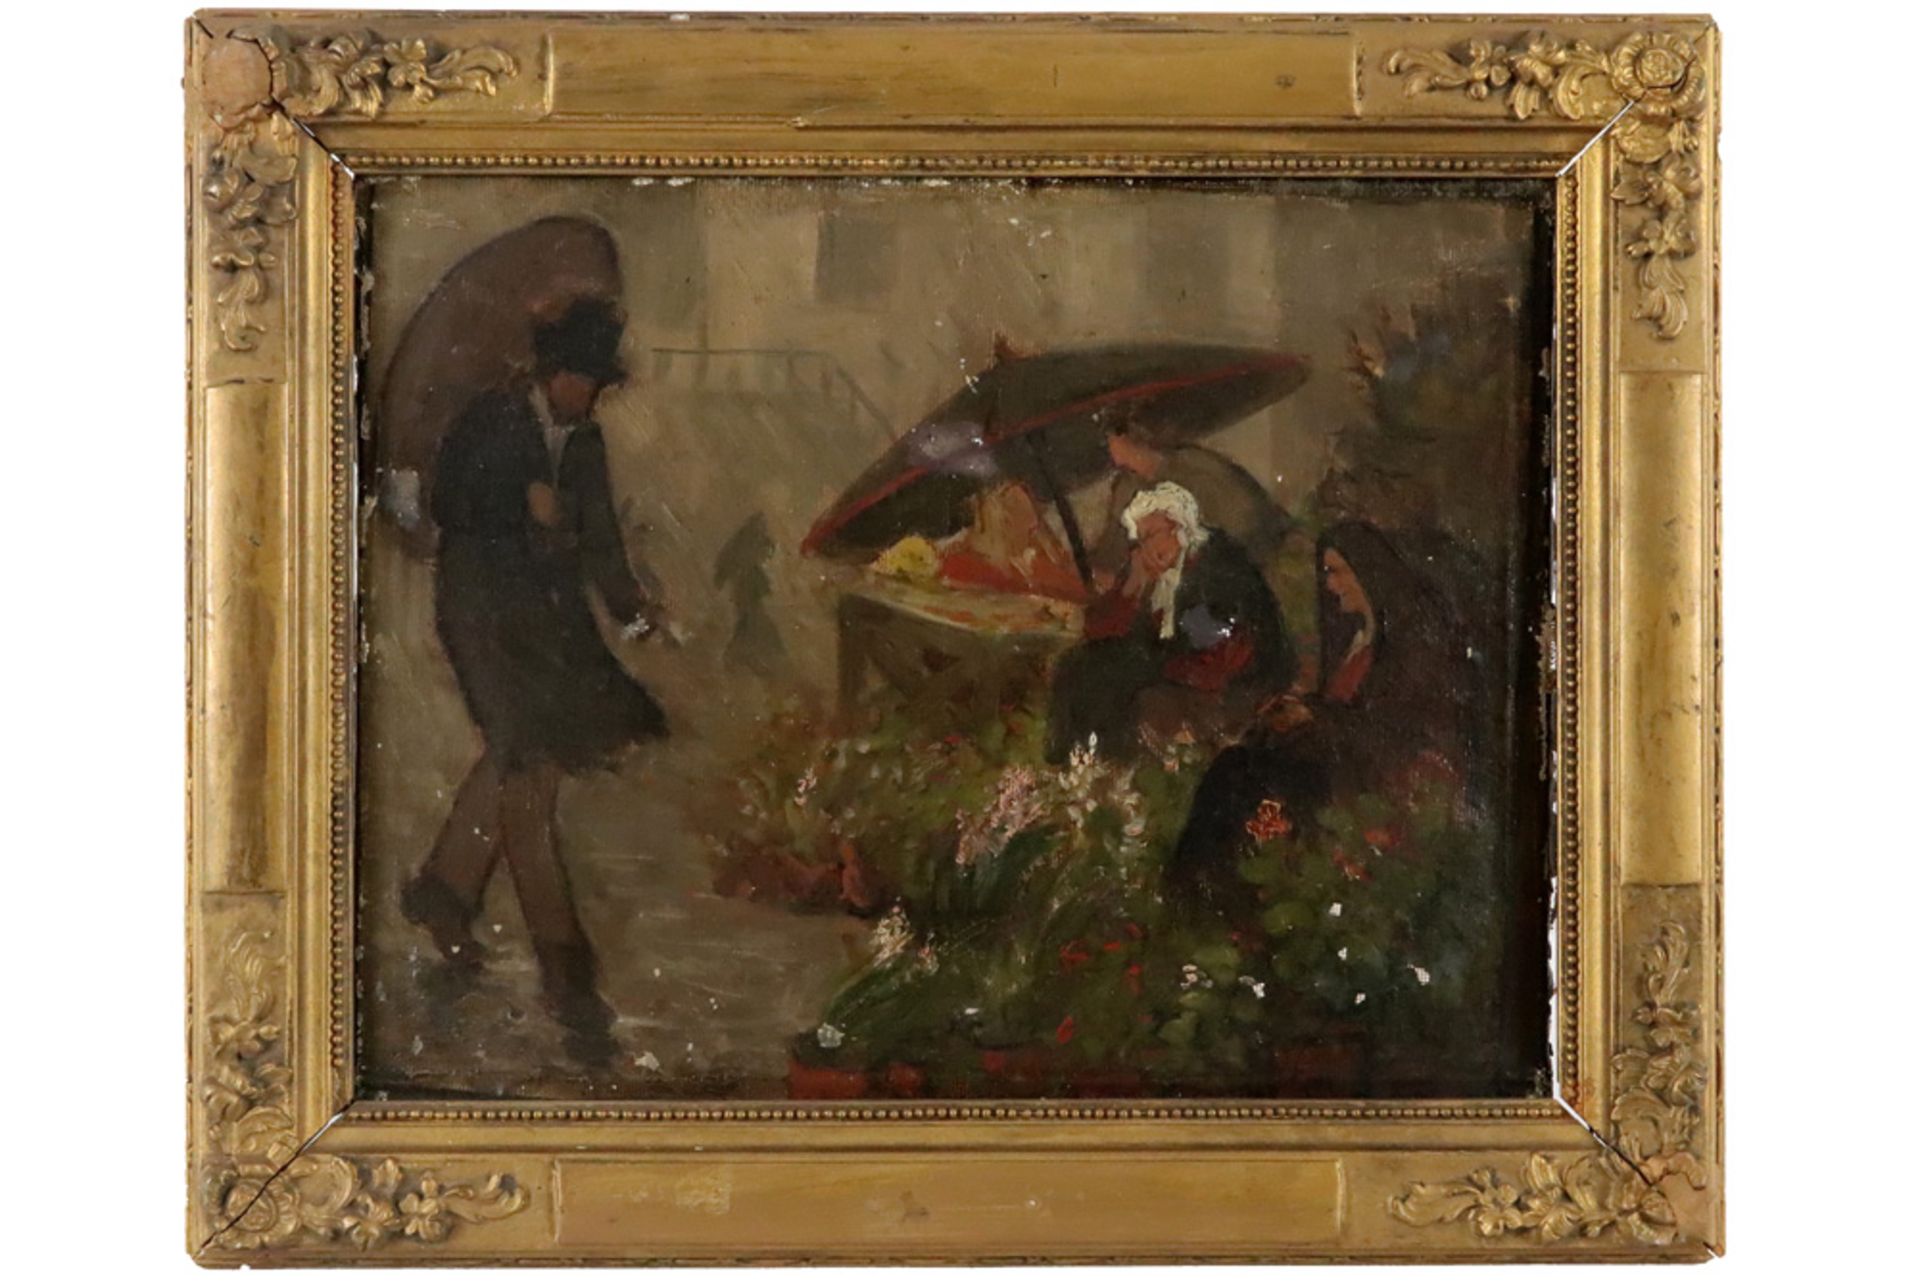 19th/20th Cent. Belgian oil on canvas - with a monogram || BELGISCHE SCHOOL - ca 1900 - Image 2 of 4